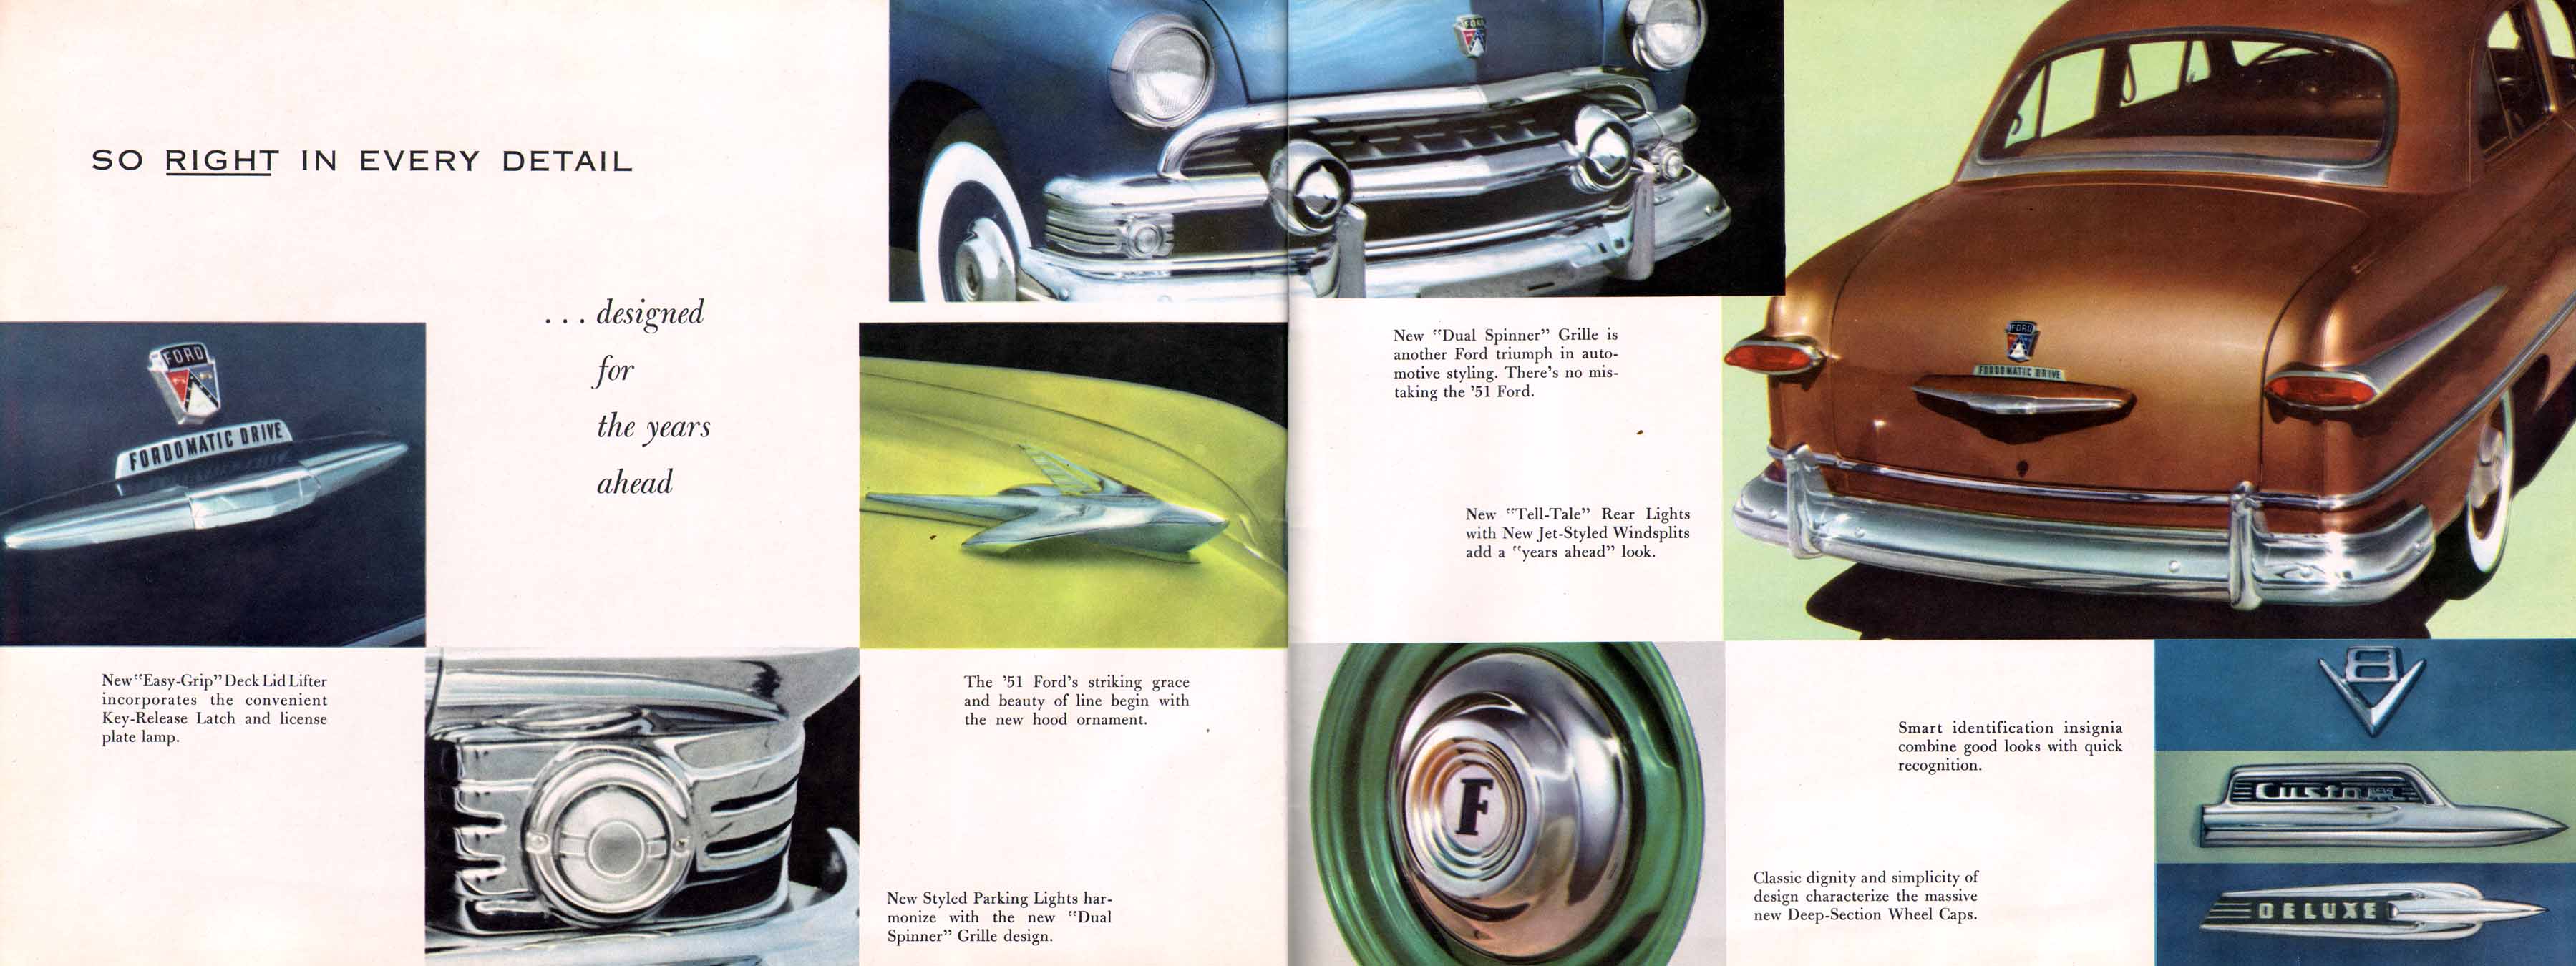 1951_Ford-22-23